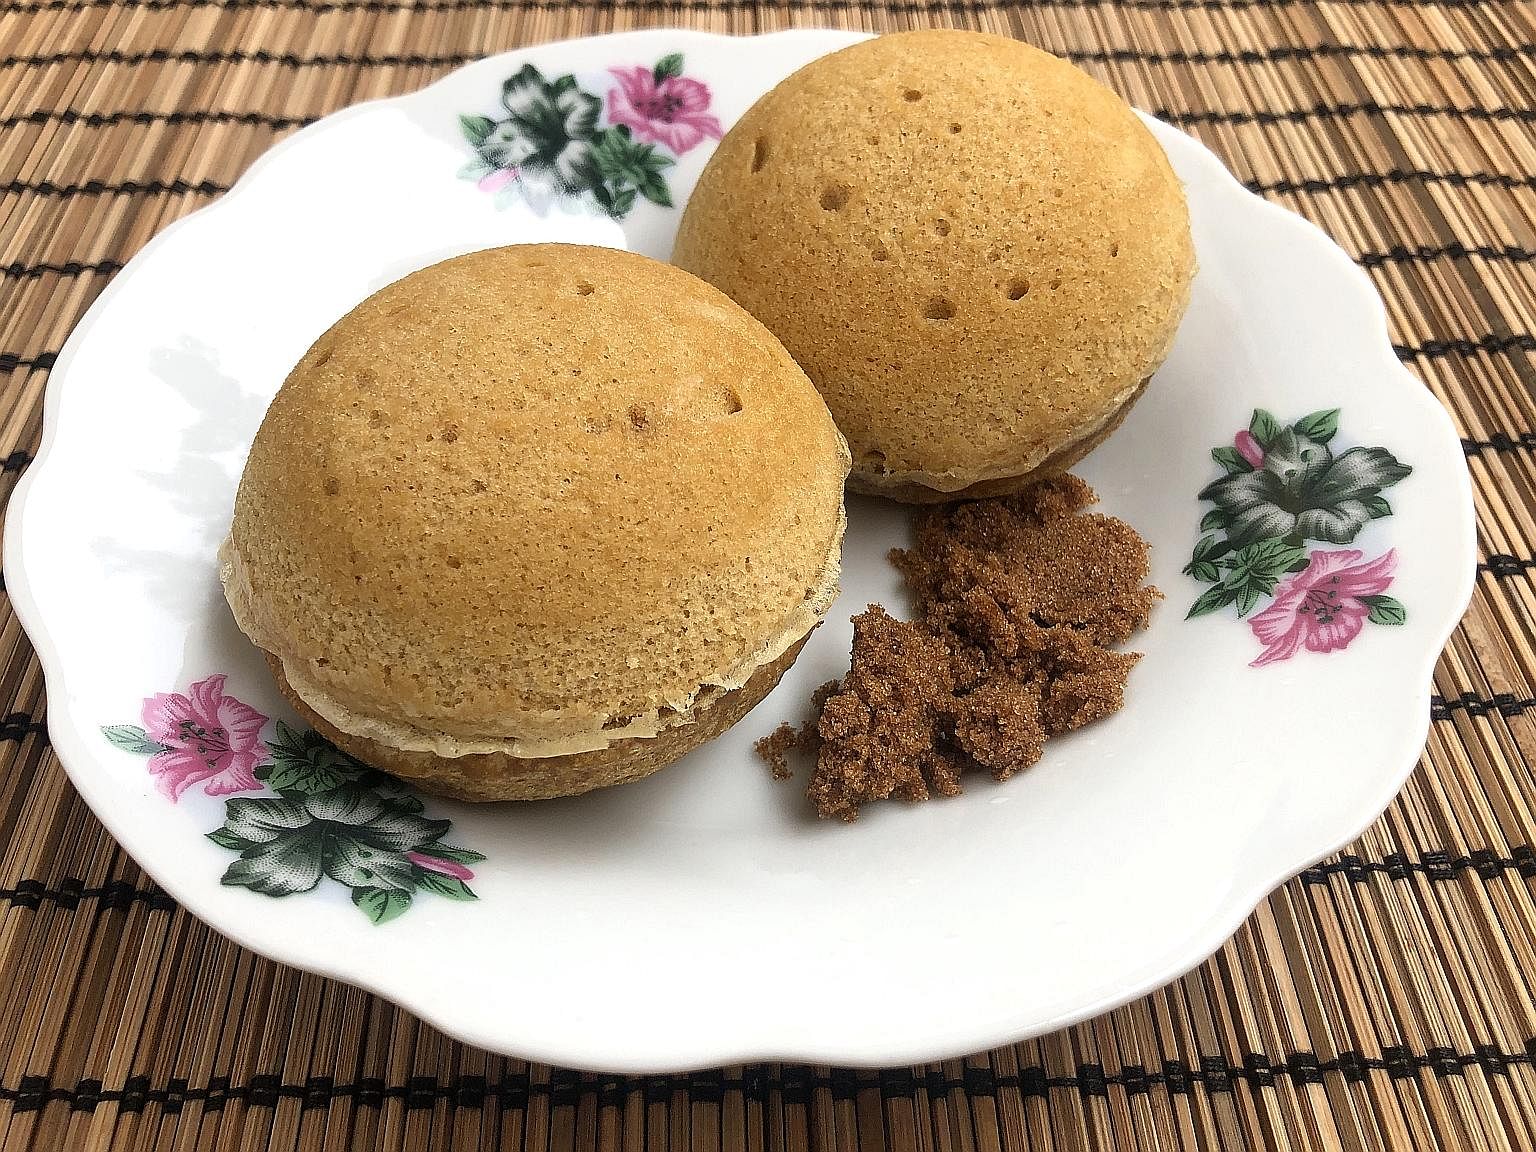 Homemade steamed sponge cakes served with a side of brown sugar.